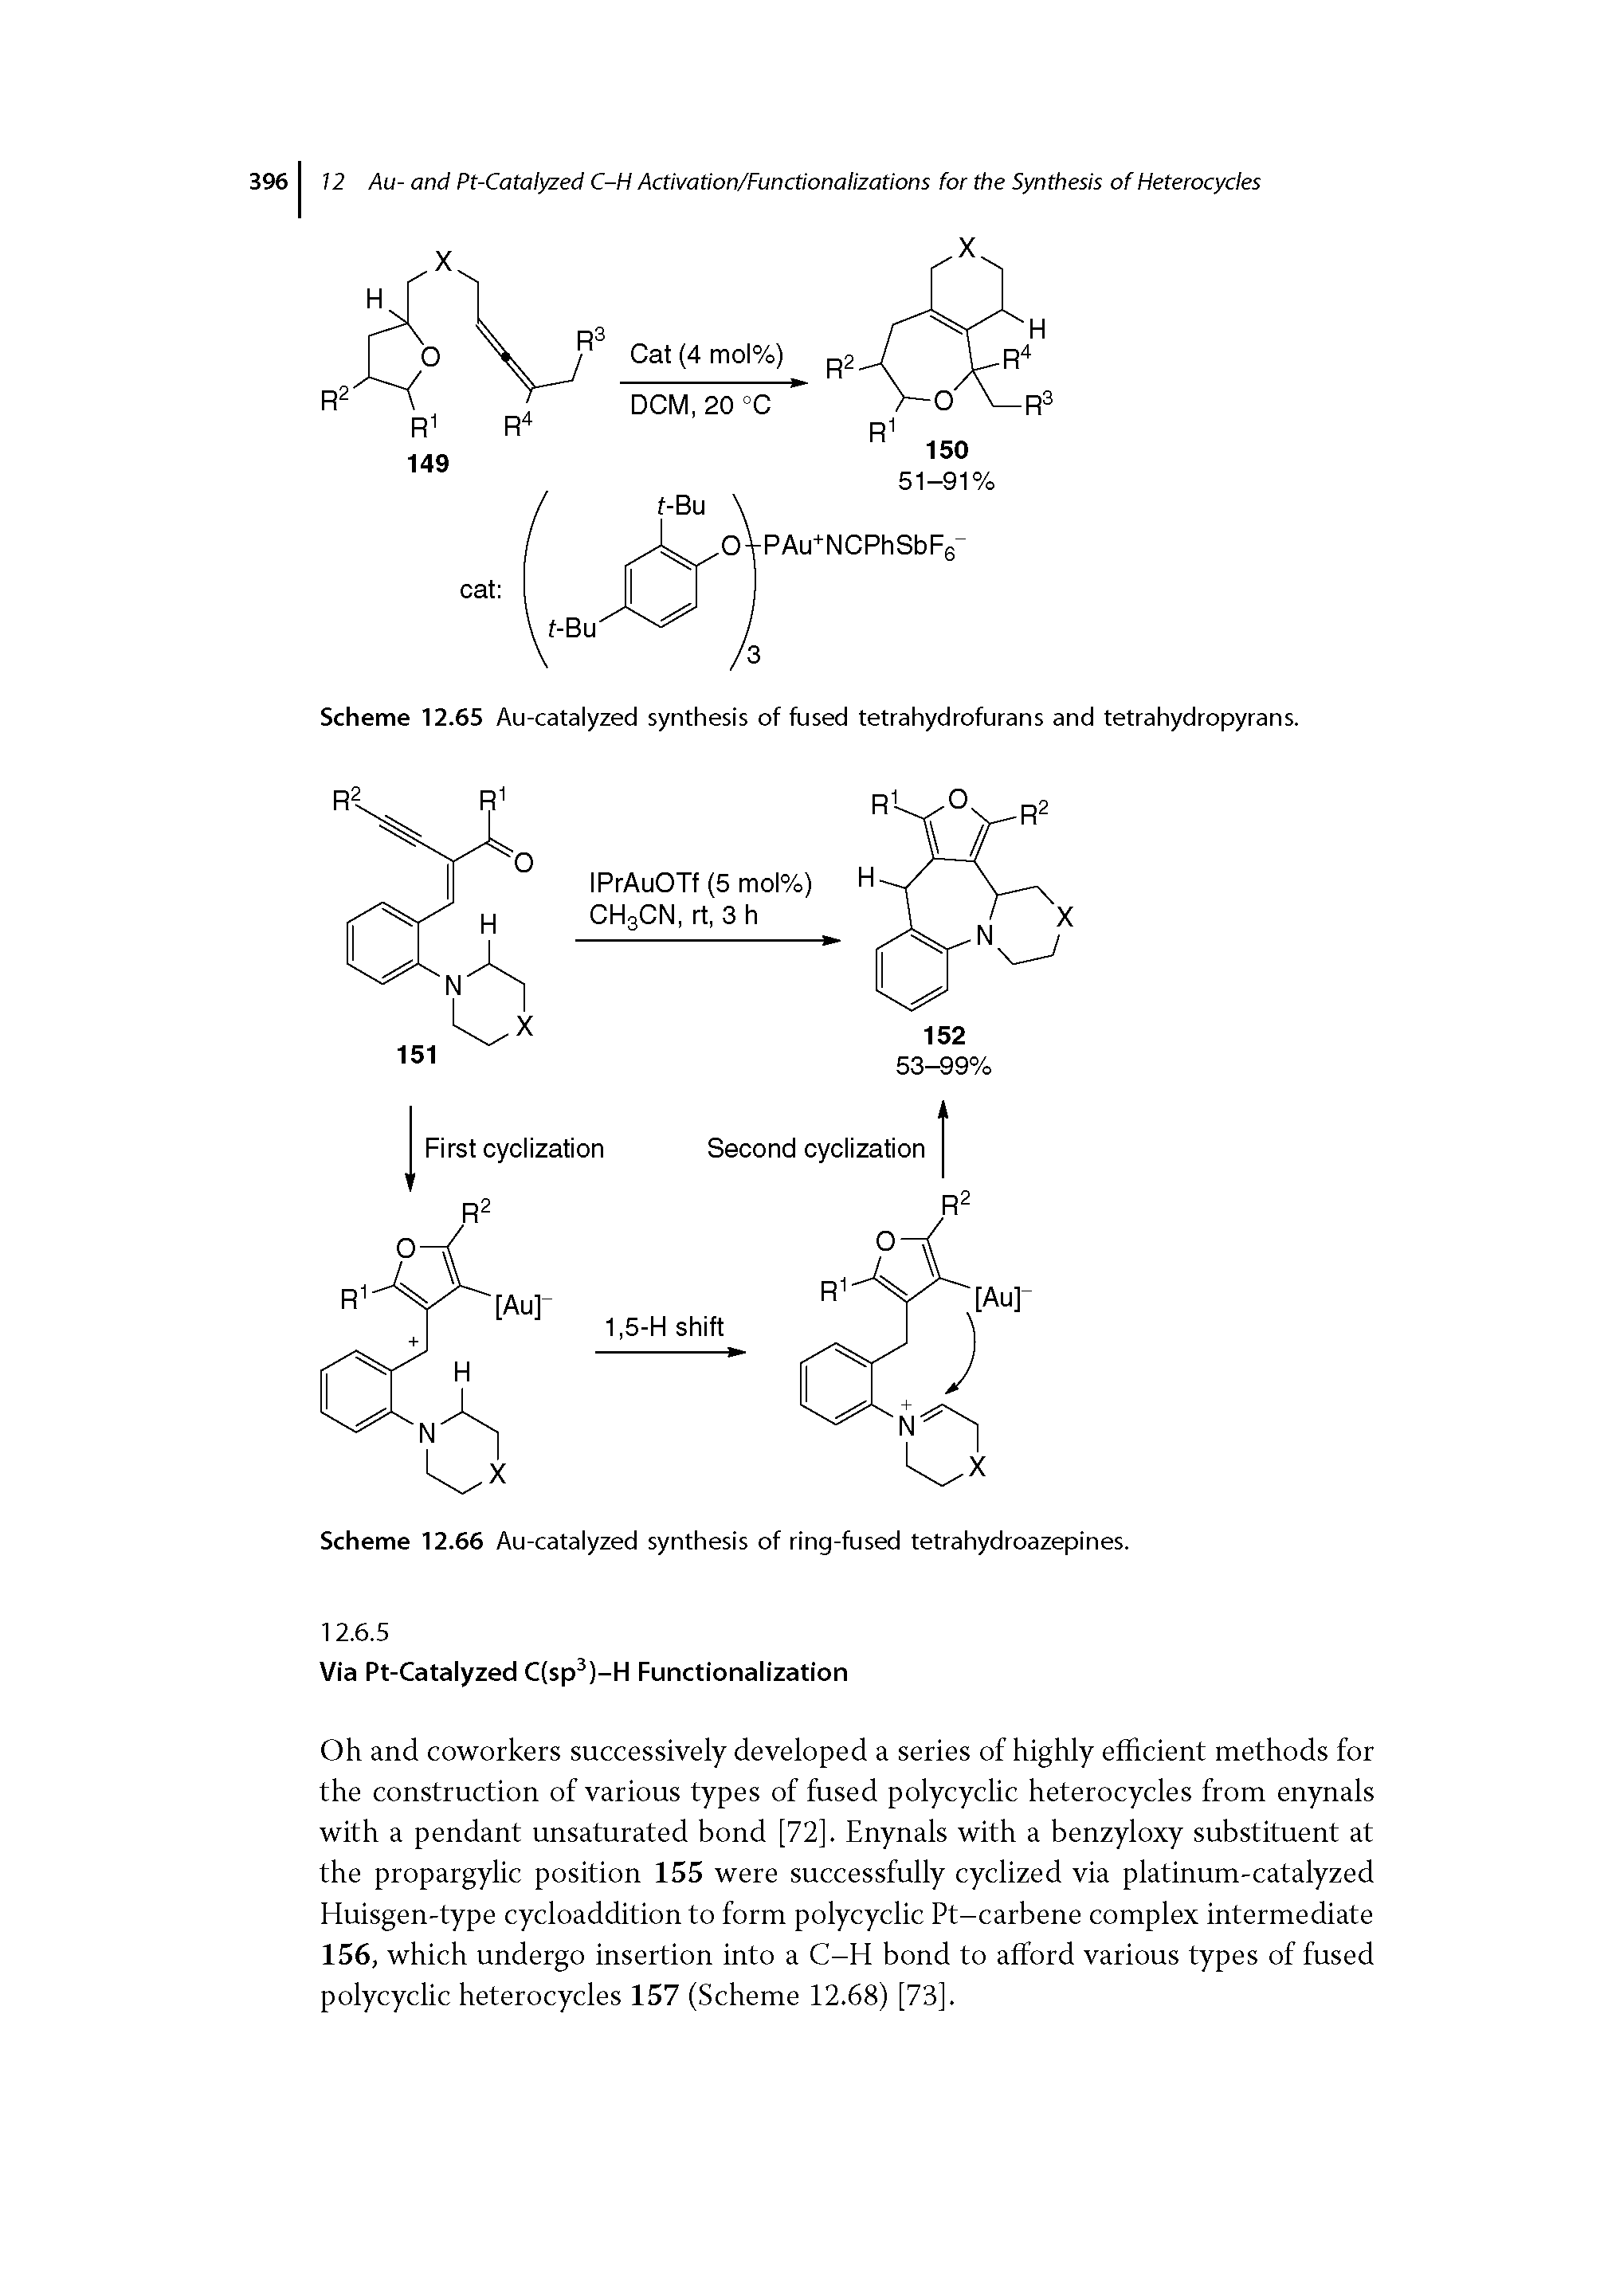 Scheme 12.66 Au-catalyzed synthesis of ring-fused tetrahydroazepines. 1 2.6.5...